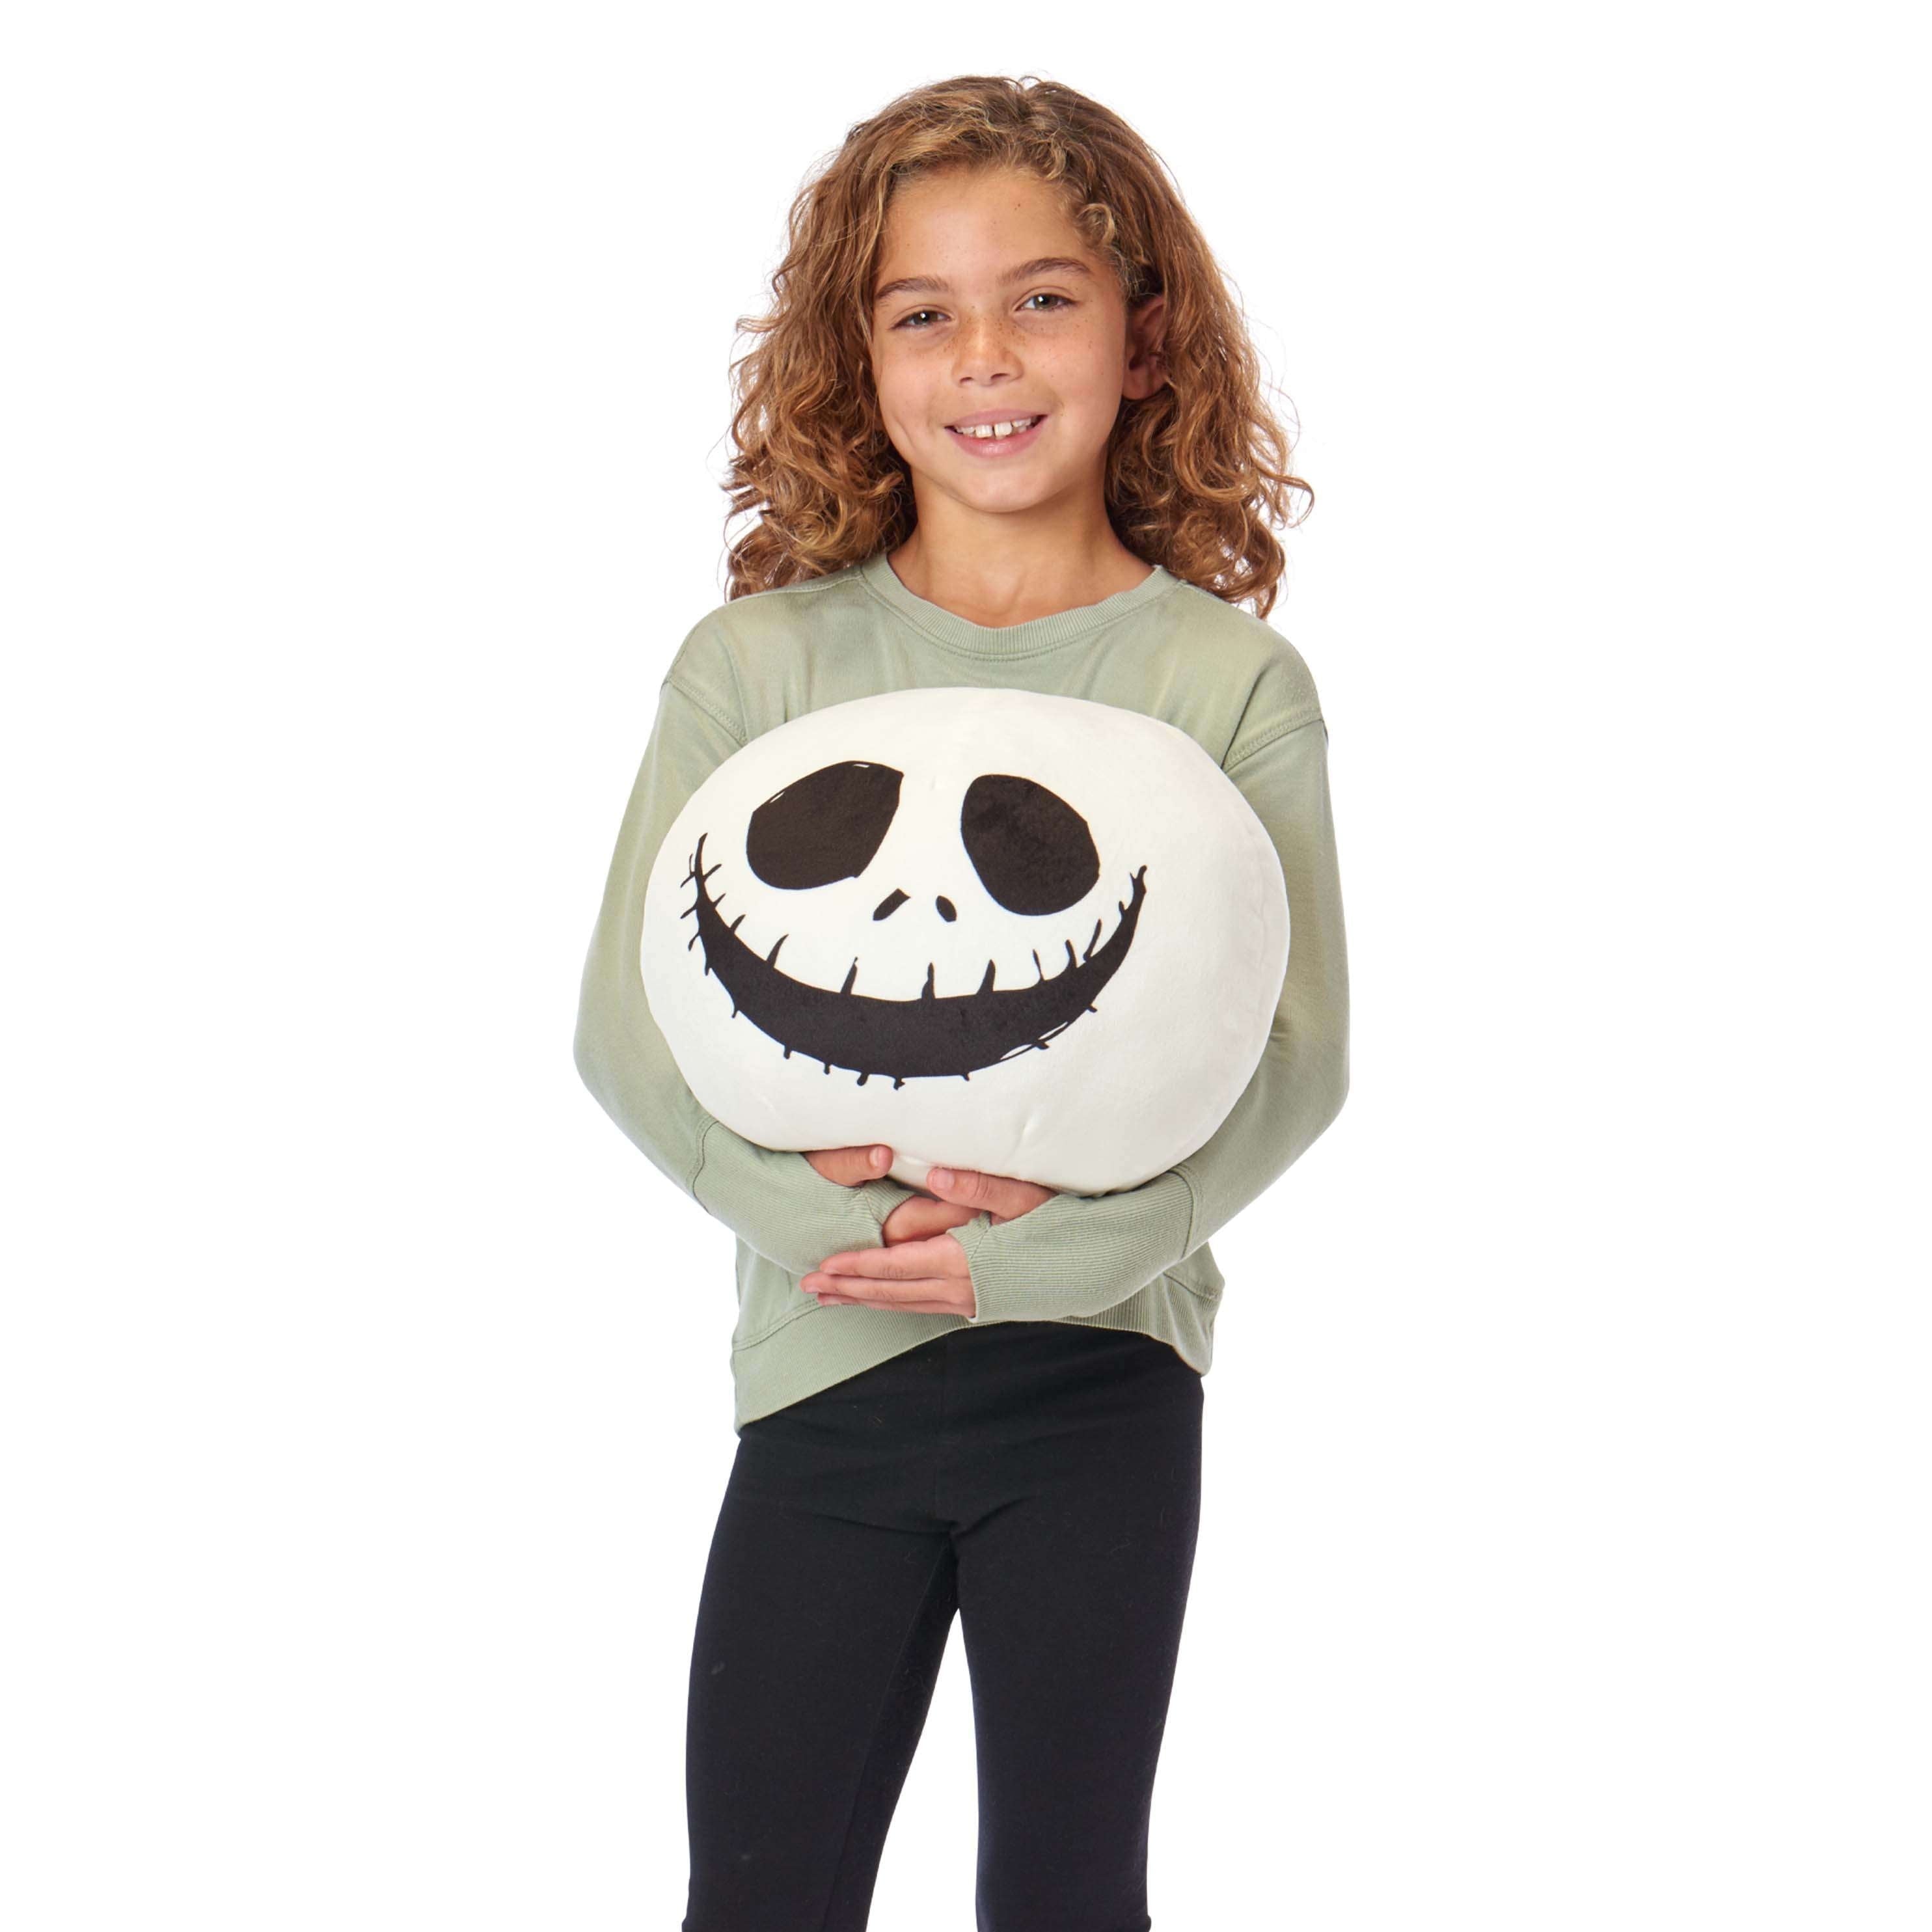 Disney Nightmare Before Christmas Big Smile Kids Round Cloud Pillow 11 Inches